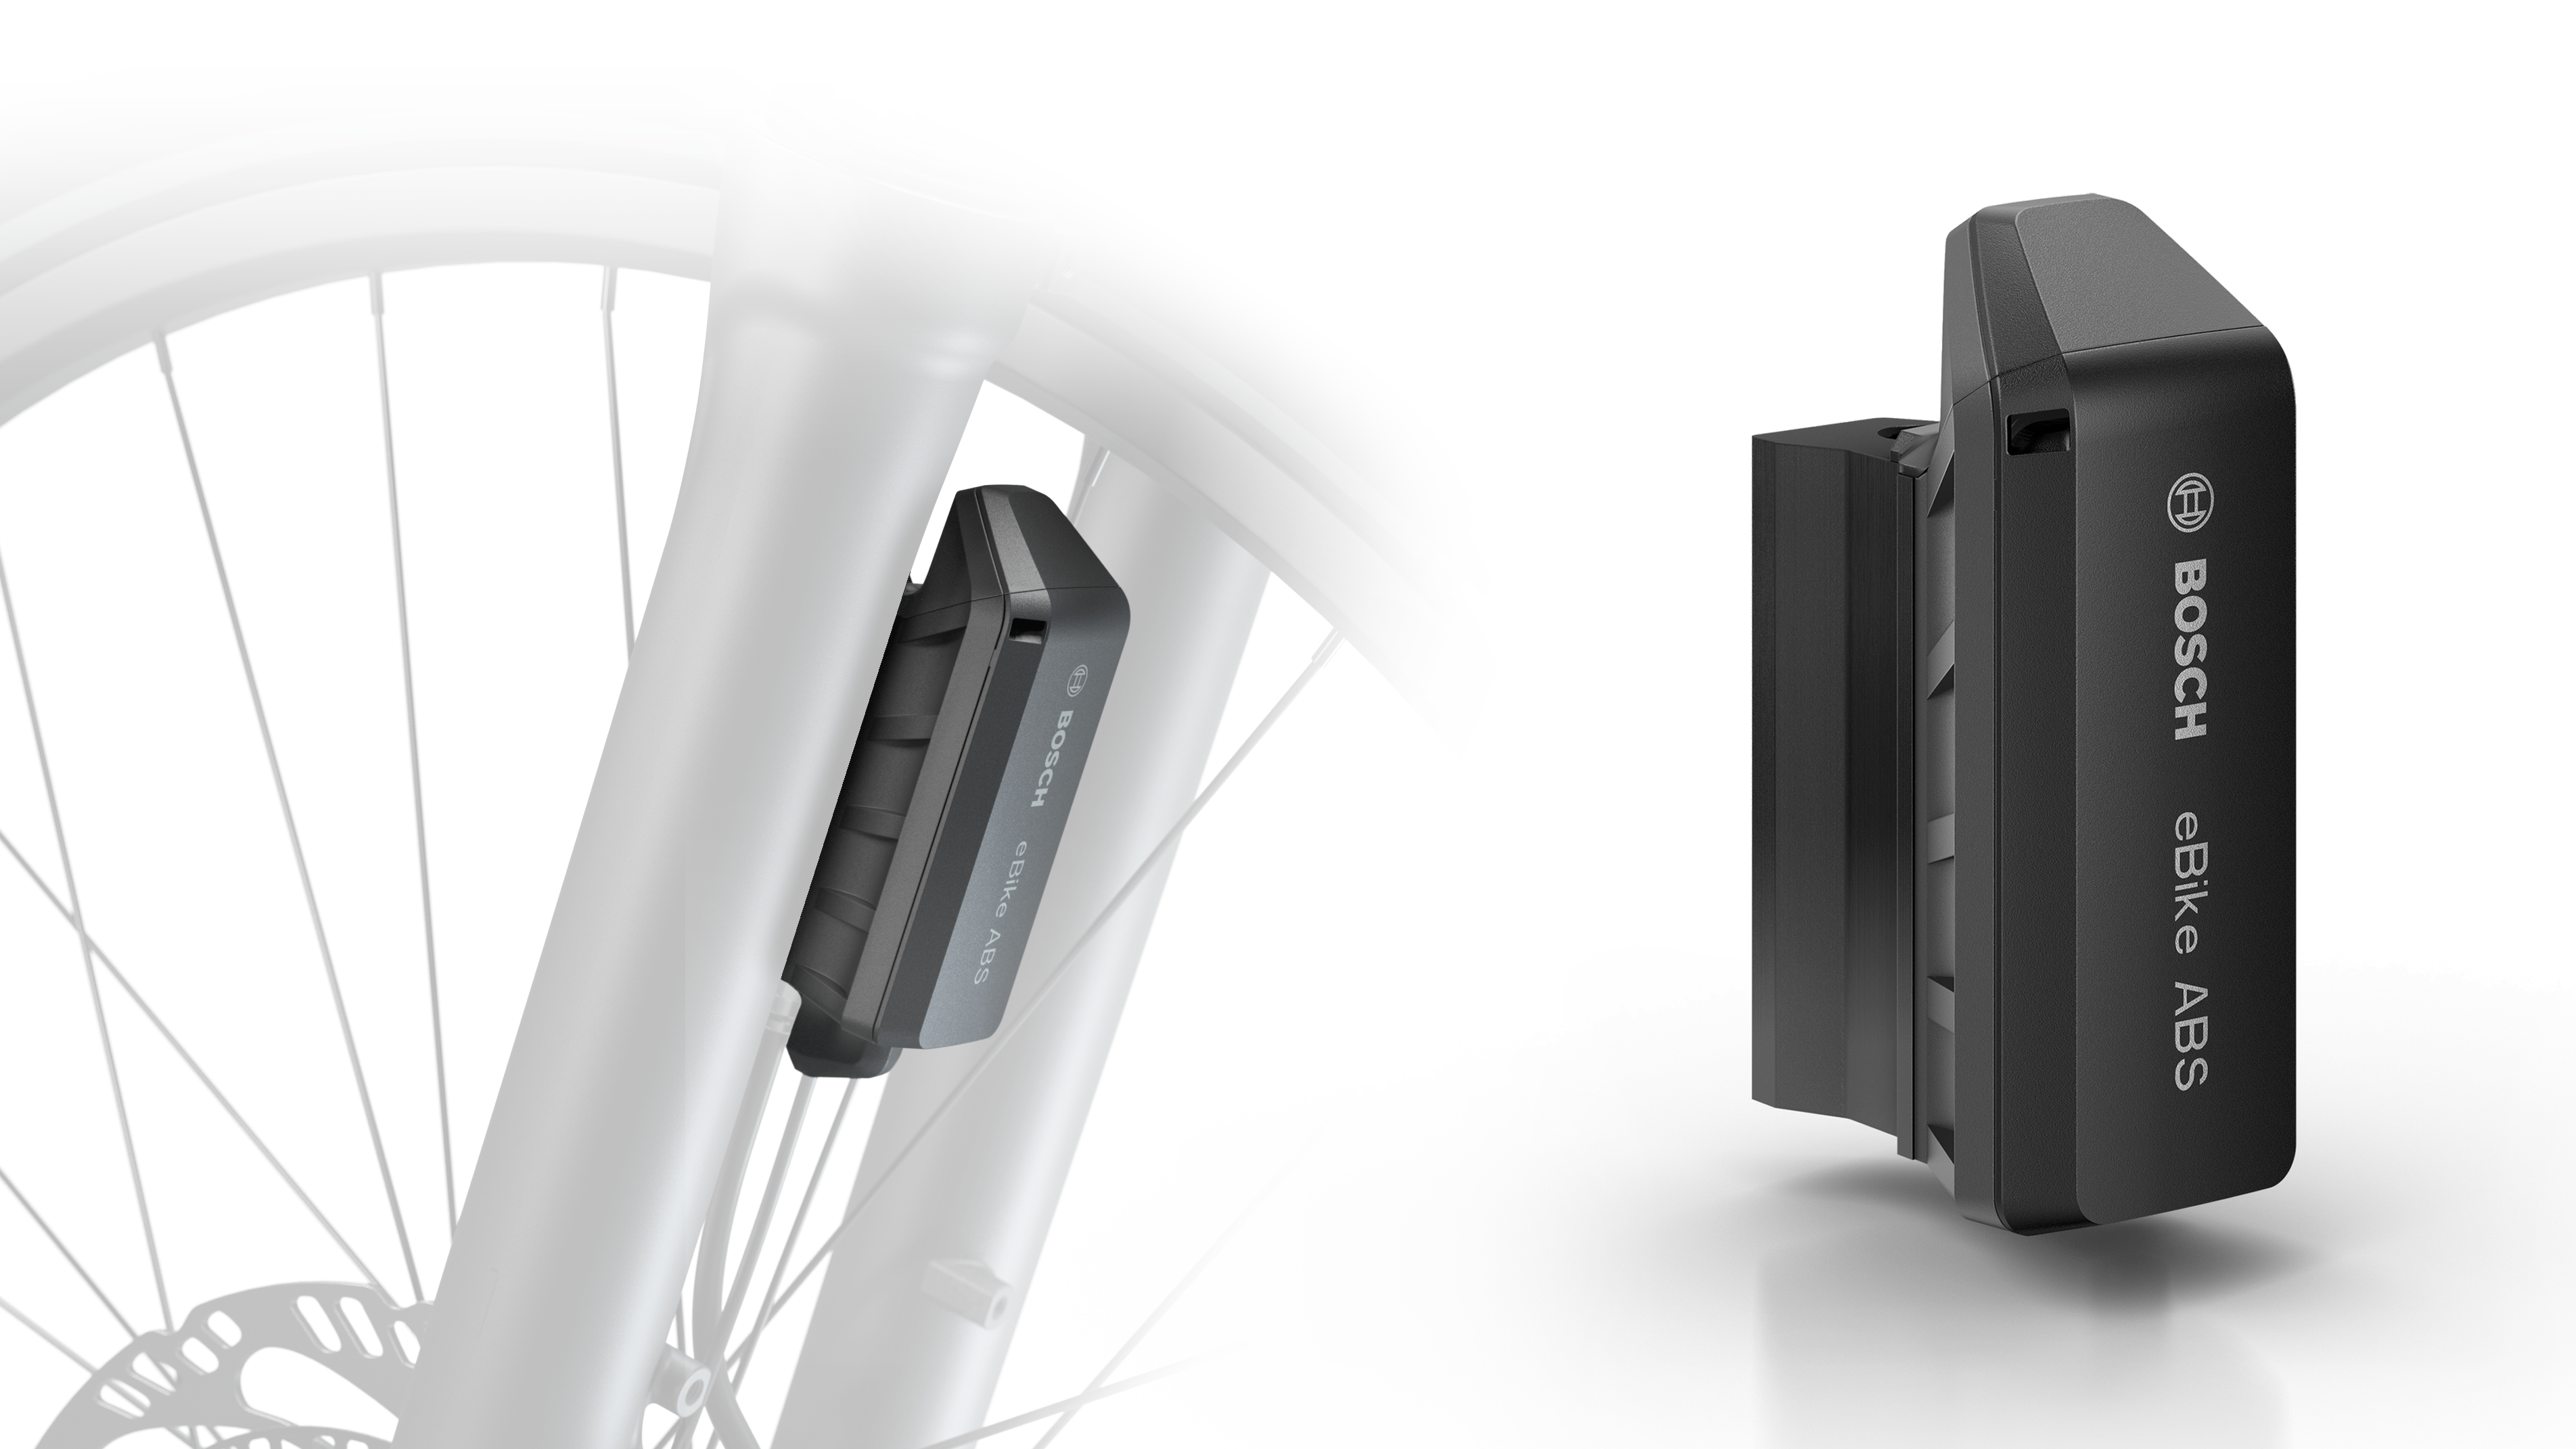 Bosch eBike Systems - The Smart System